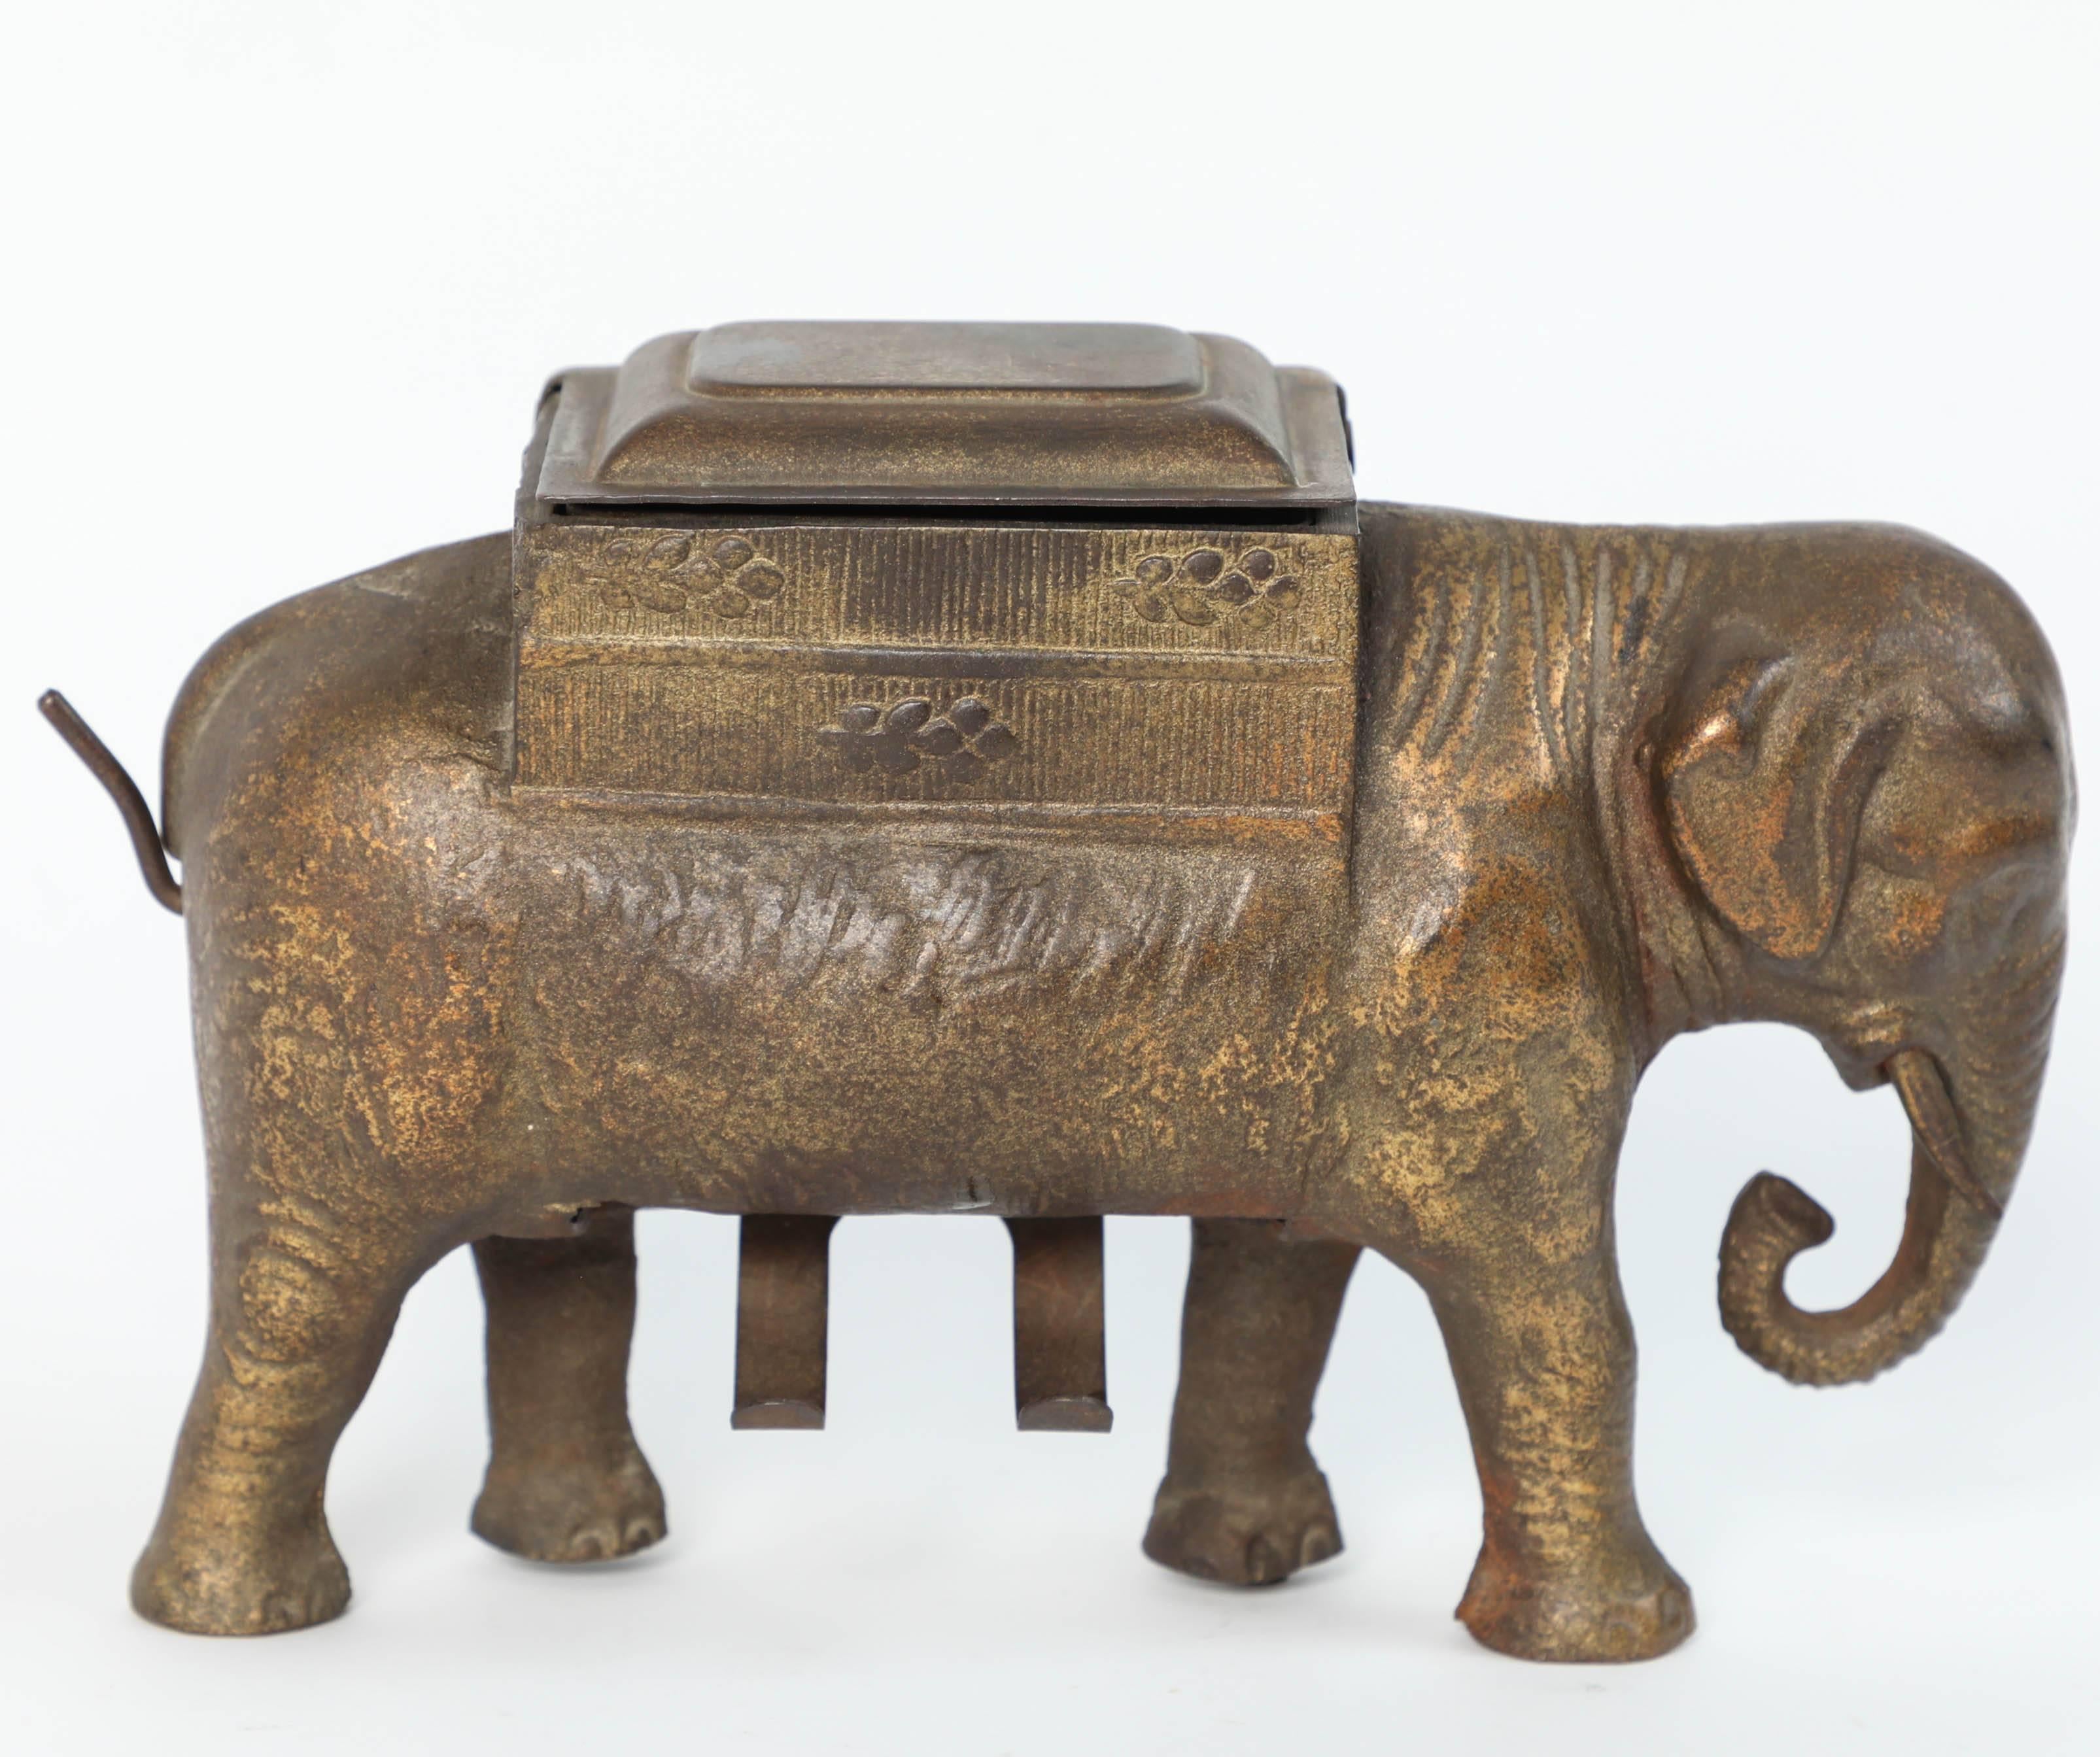 Antique Art Deco heavy cast iron elephant cigarettes holder and dispenser.
This is a nicely detailed heavy piece and in good working condition, brass color finish.
Cigarettes are stored in the trunk on the elephant back.
A turn of the tail drops